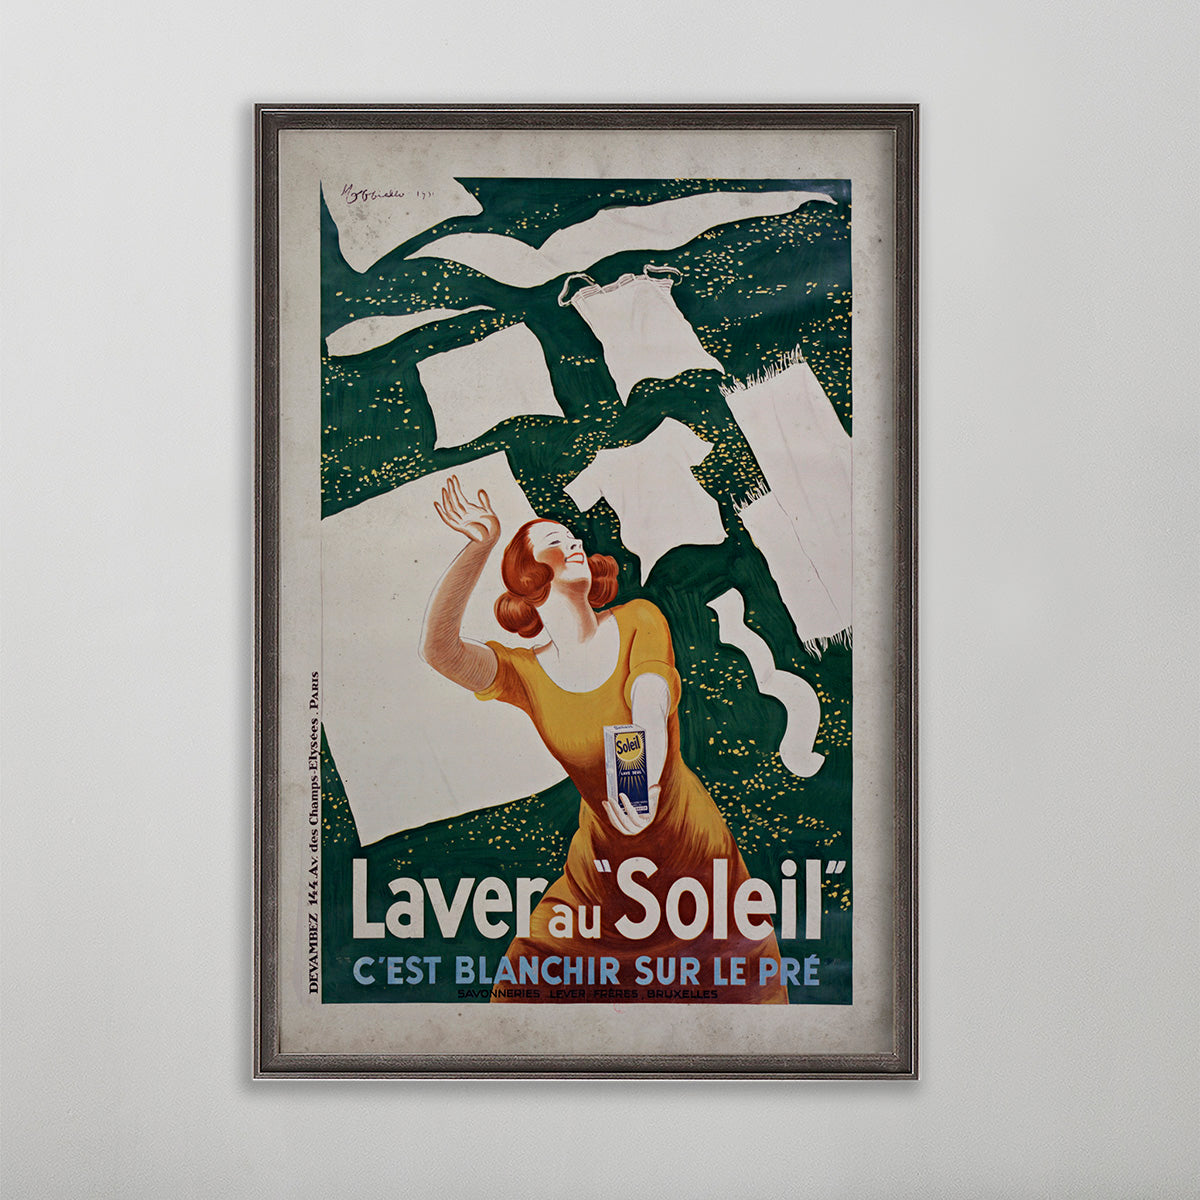 Laver au Soleil vintage poster wall art by leonetto cappiello. Woman and fresh clean laundry on grass.